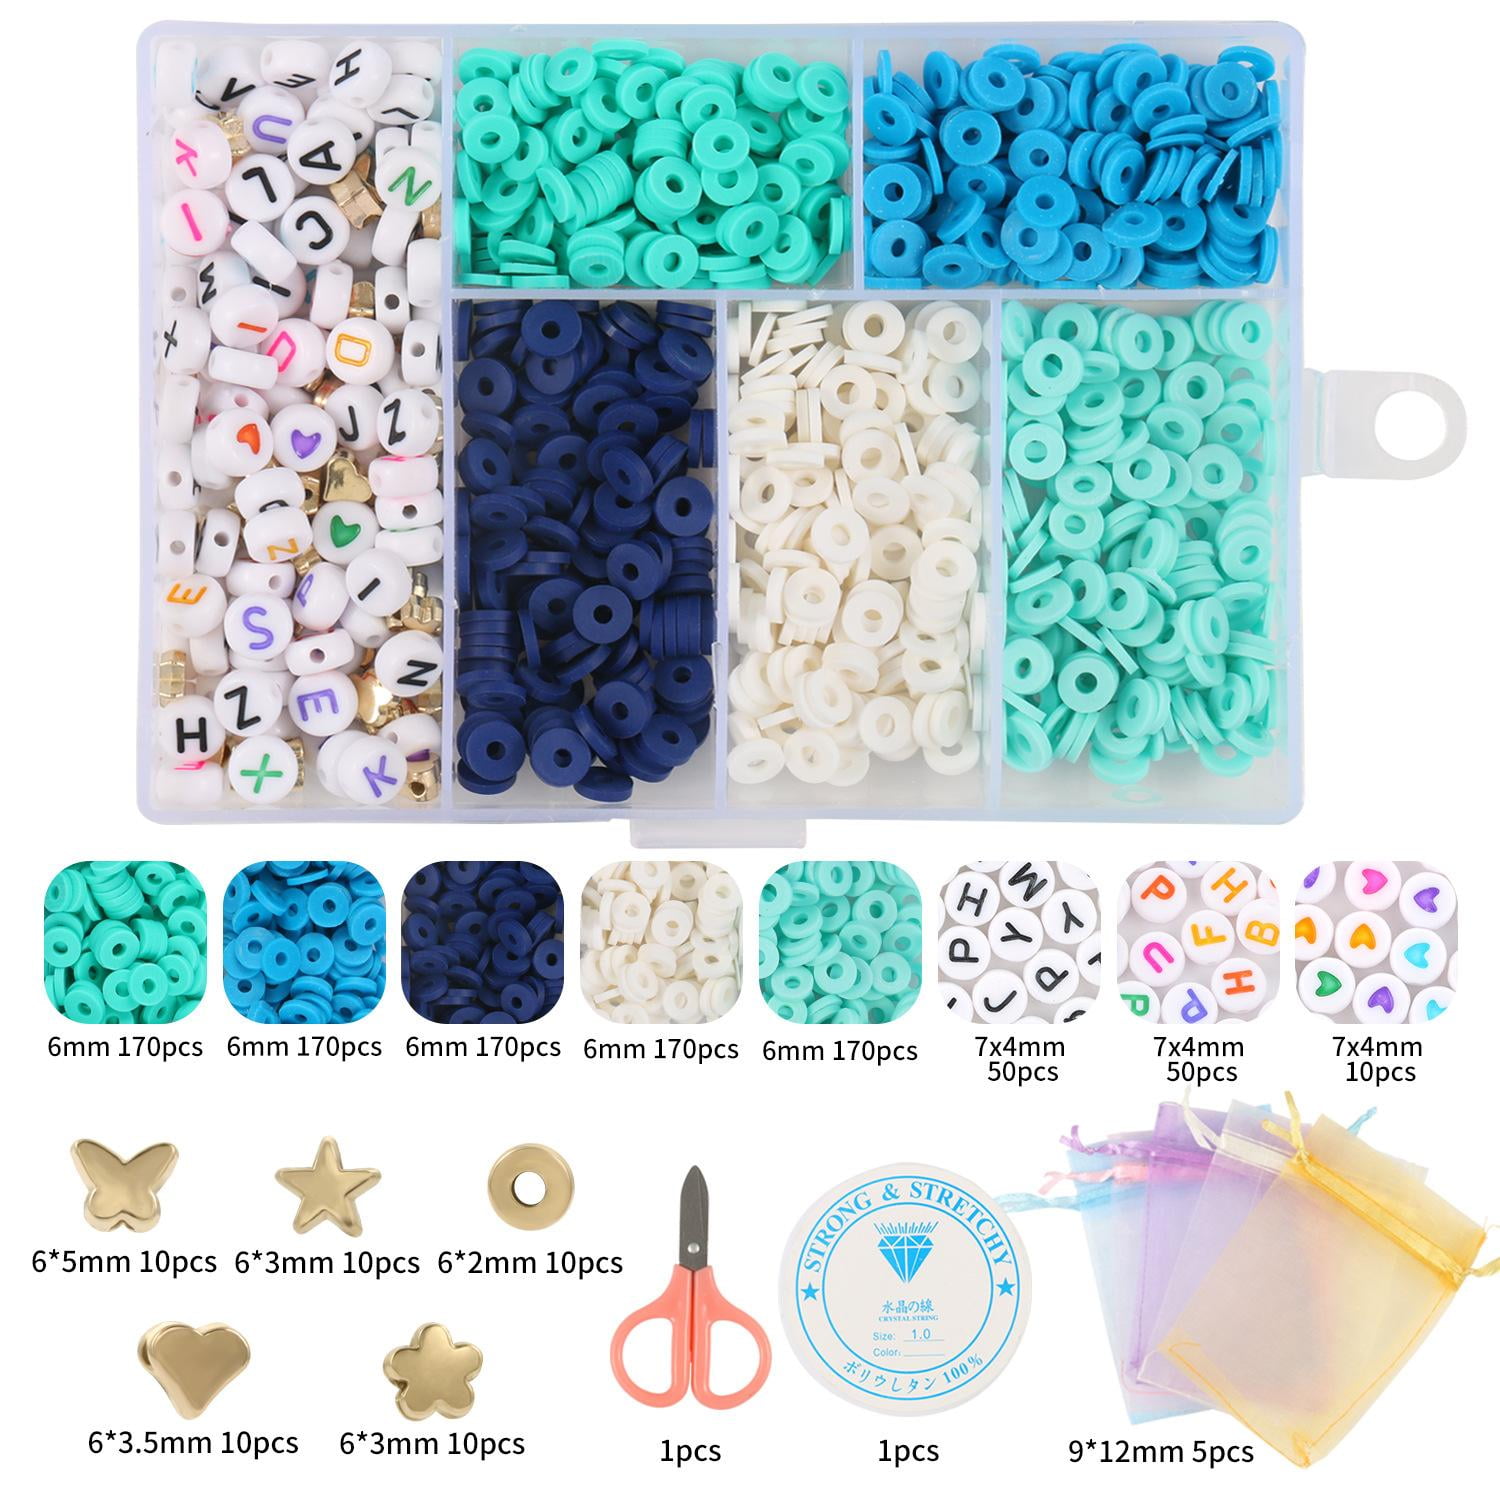 Cheriswelry 10strands 4mm Colorful Flat Round Polymer Clay Spacer Beads  About 3800pcs Loose Handmade Heishi Clay Beads for DIY Jewelry Necklace